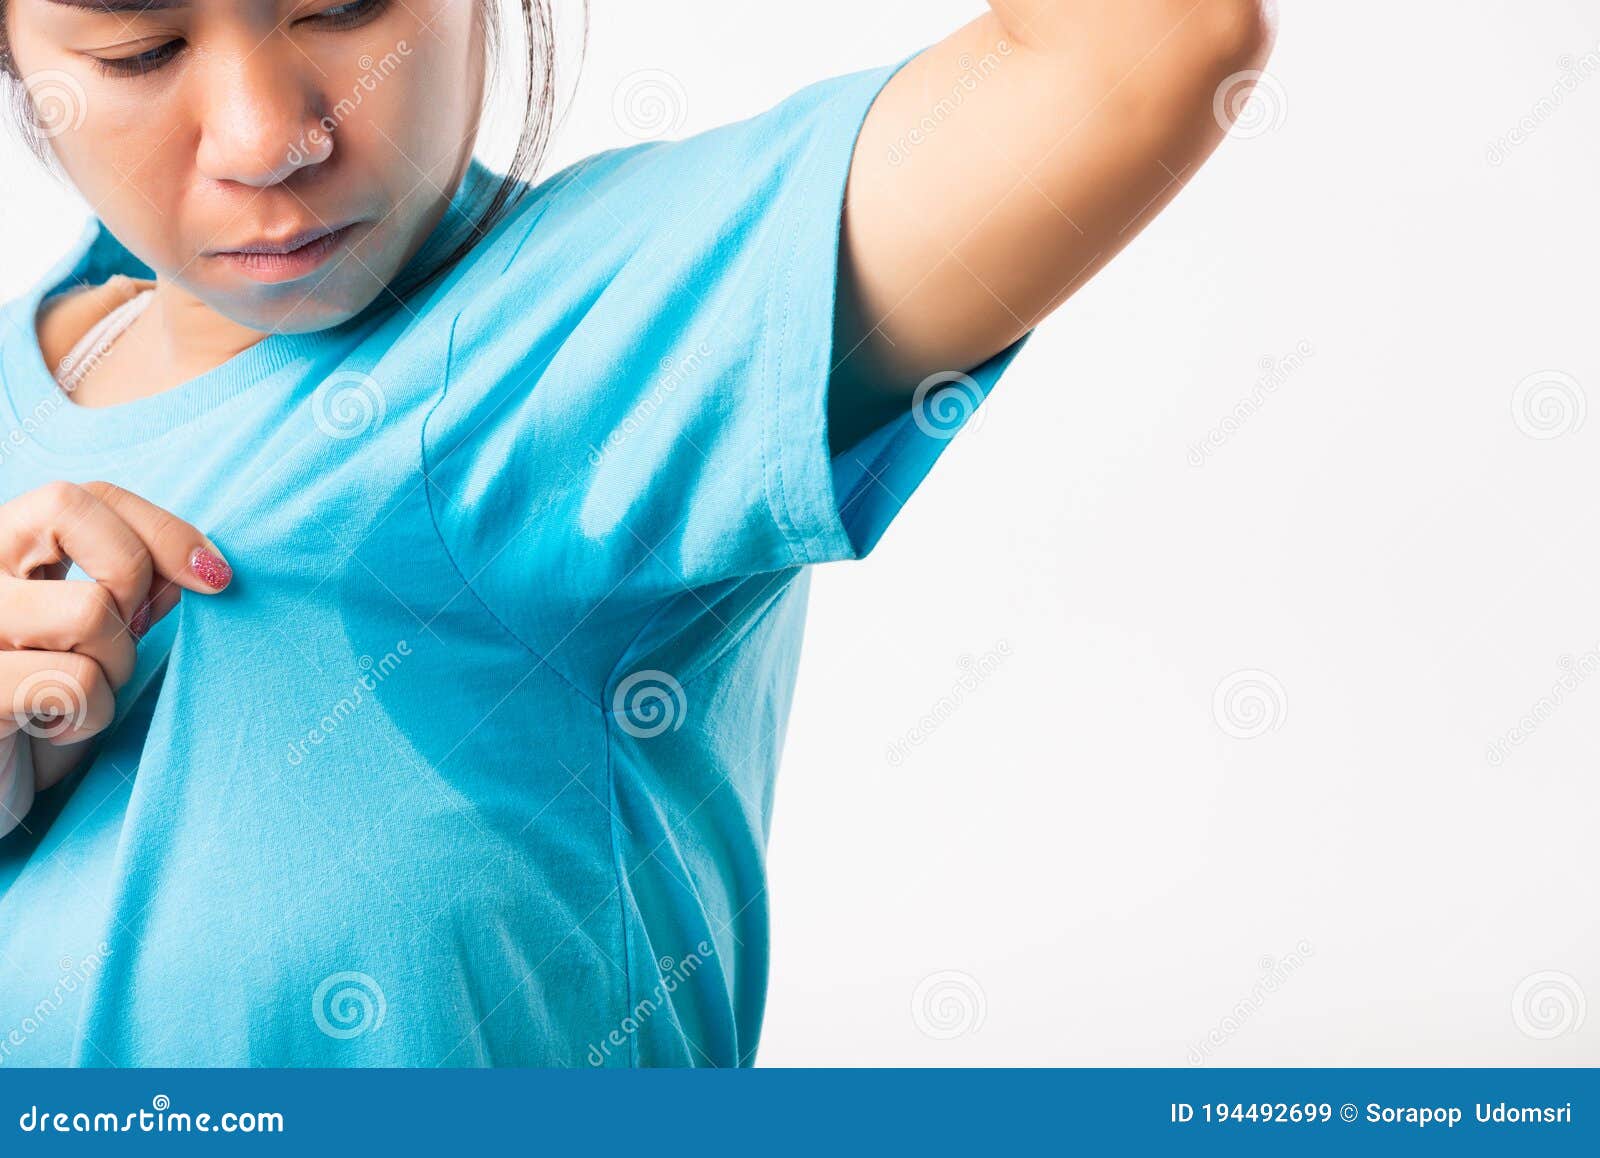 Female Very Badly Have Armpit Sweat Stain On Her Clothes Stock Image